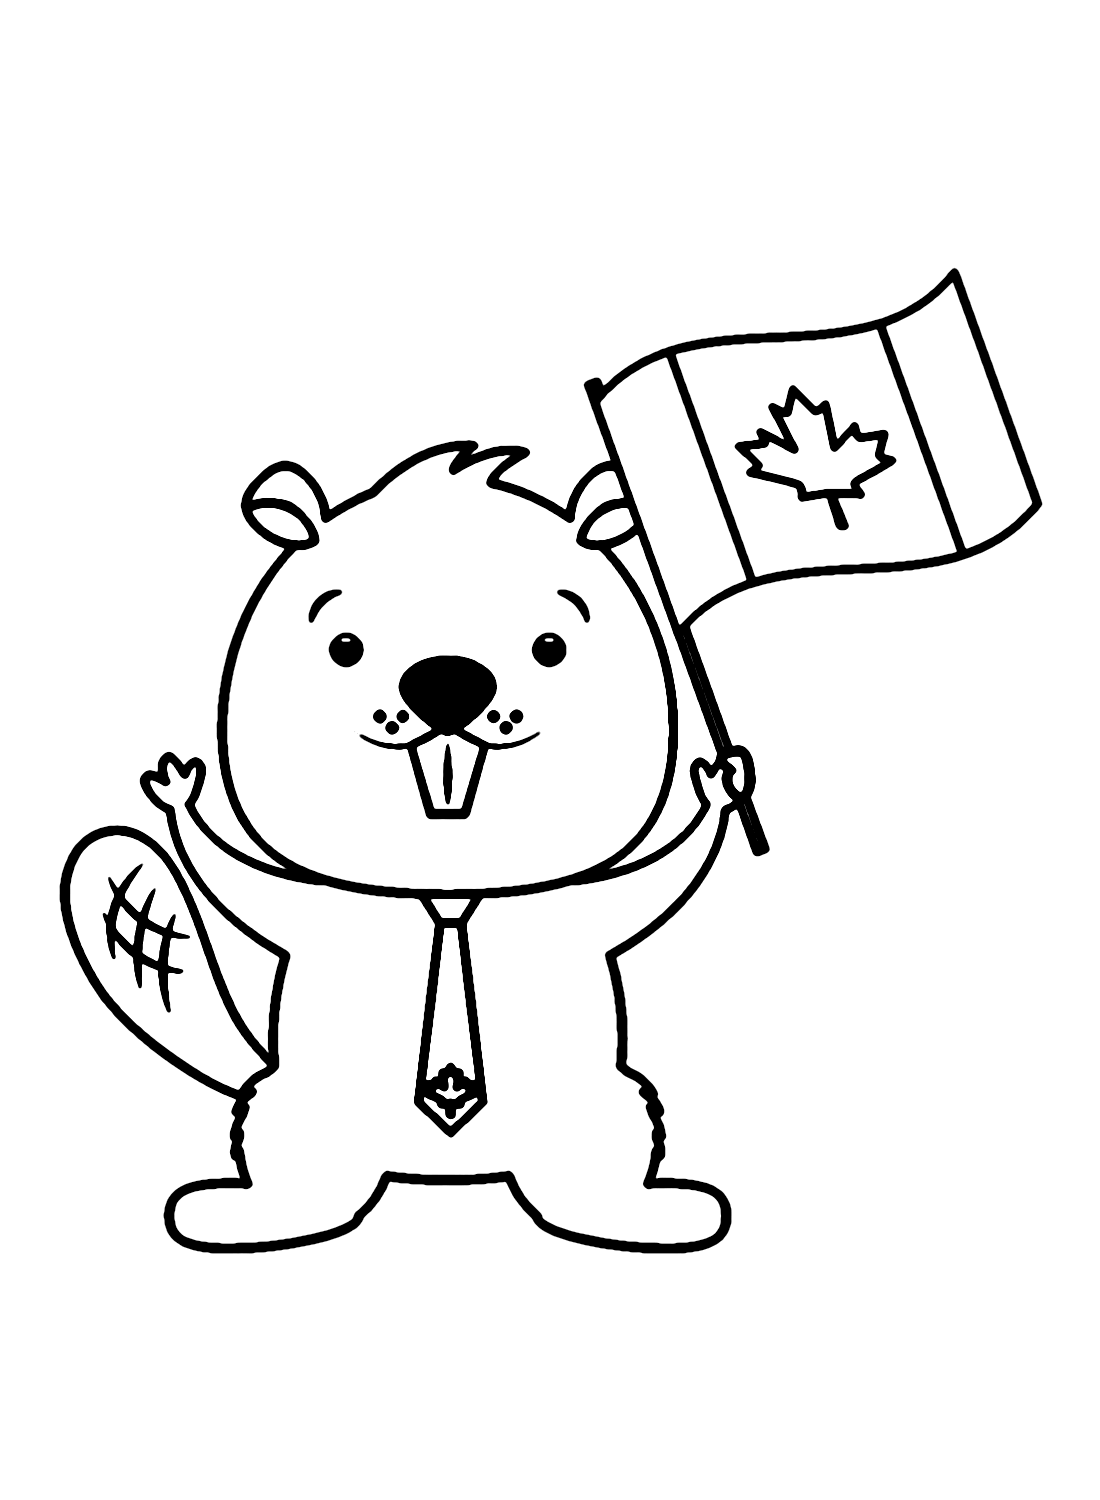 Countries cultures coloring pages